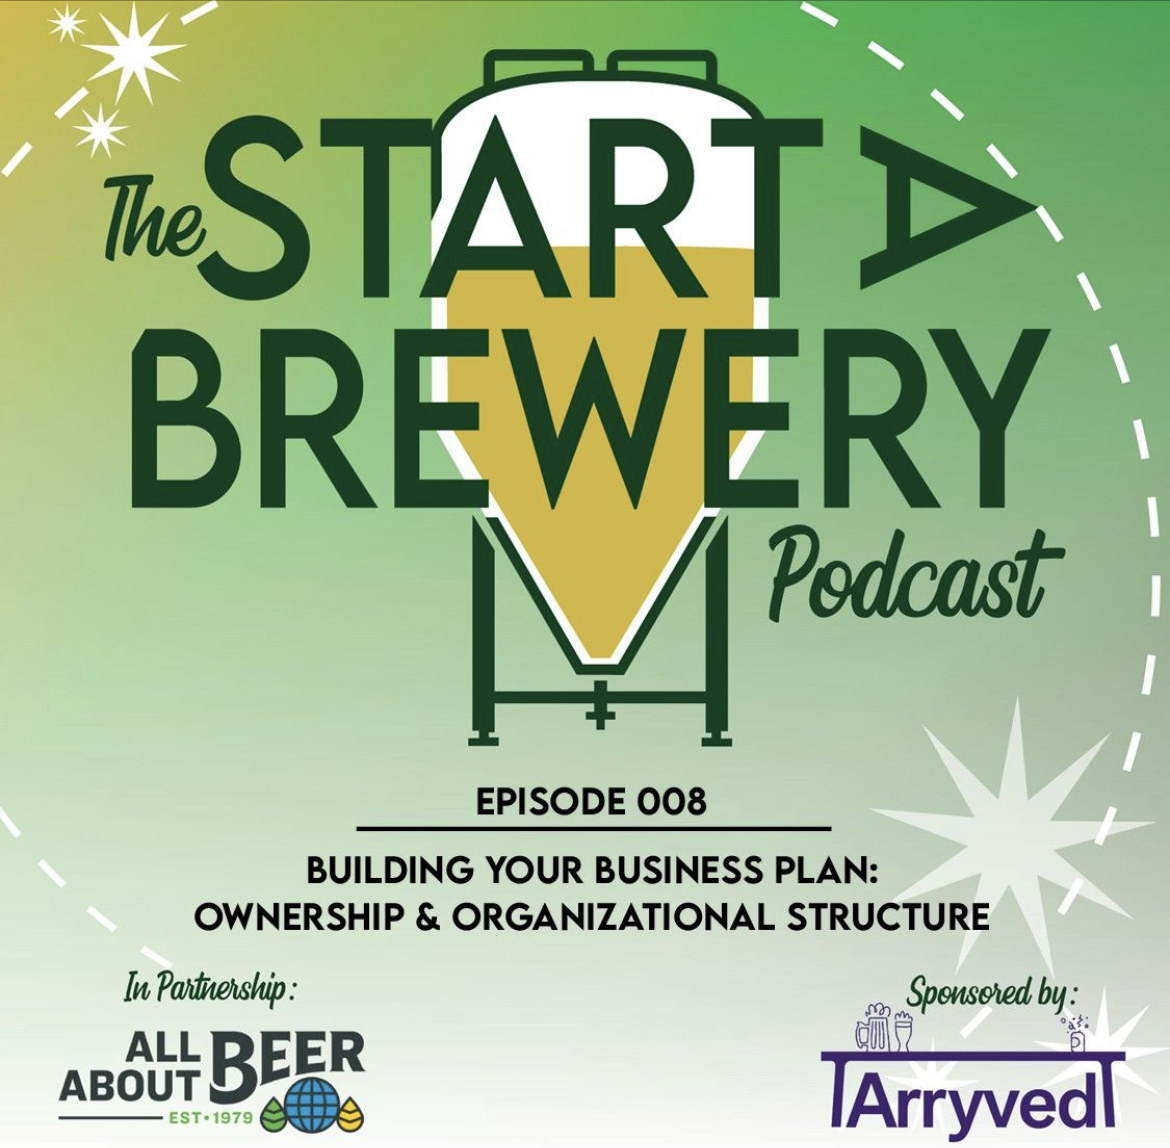 Your Business Plan: Ownership & Organizational Structure, The Start a Brewery Podcast, 4.10.23